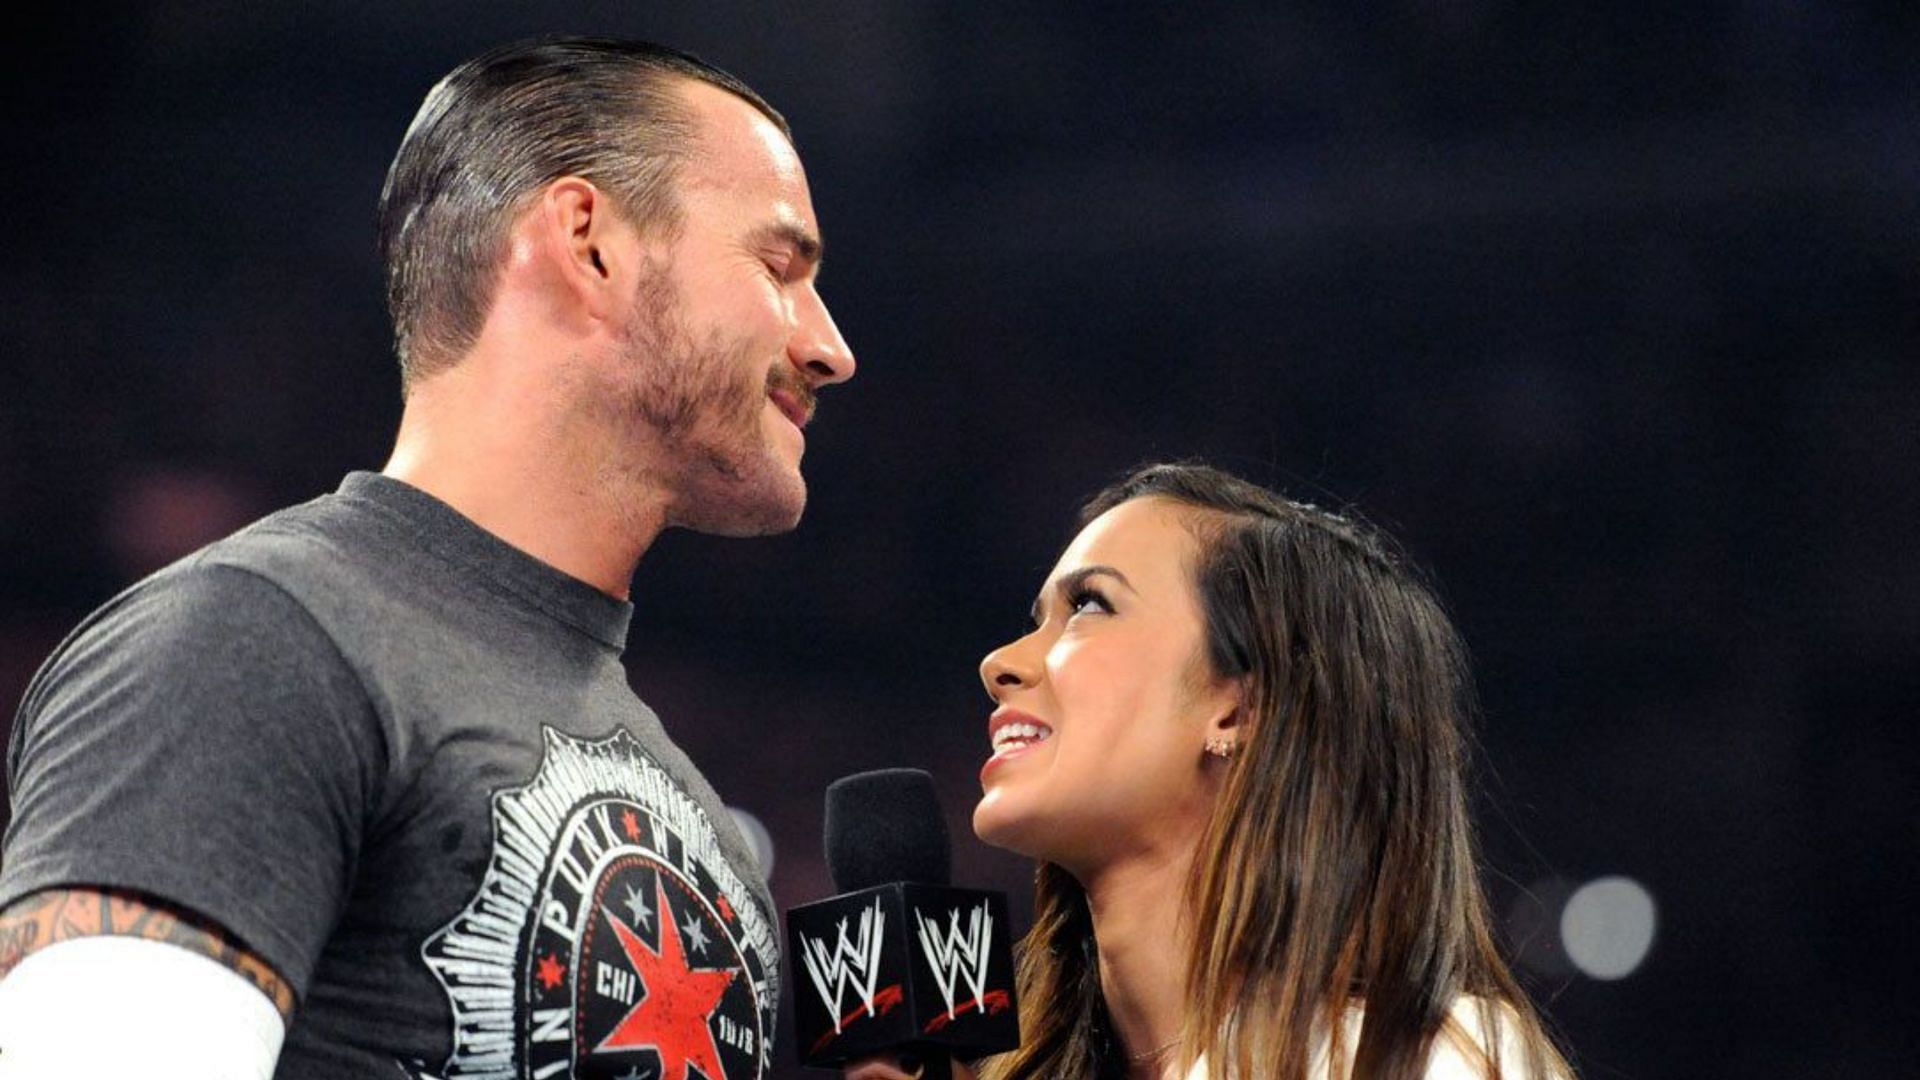 CM Punk and AJ Lee married in 2014